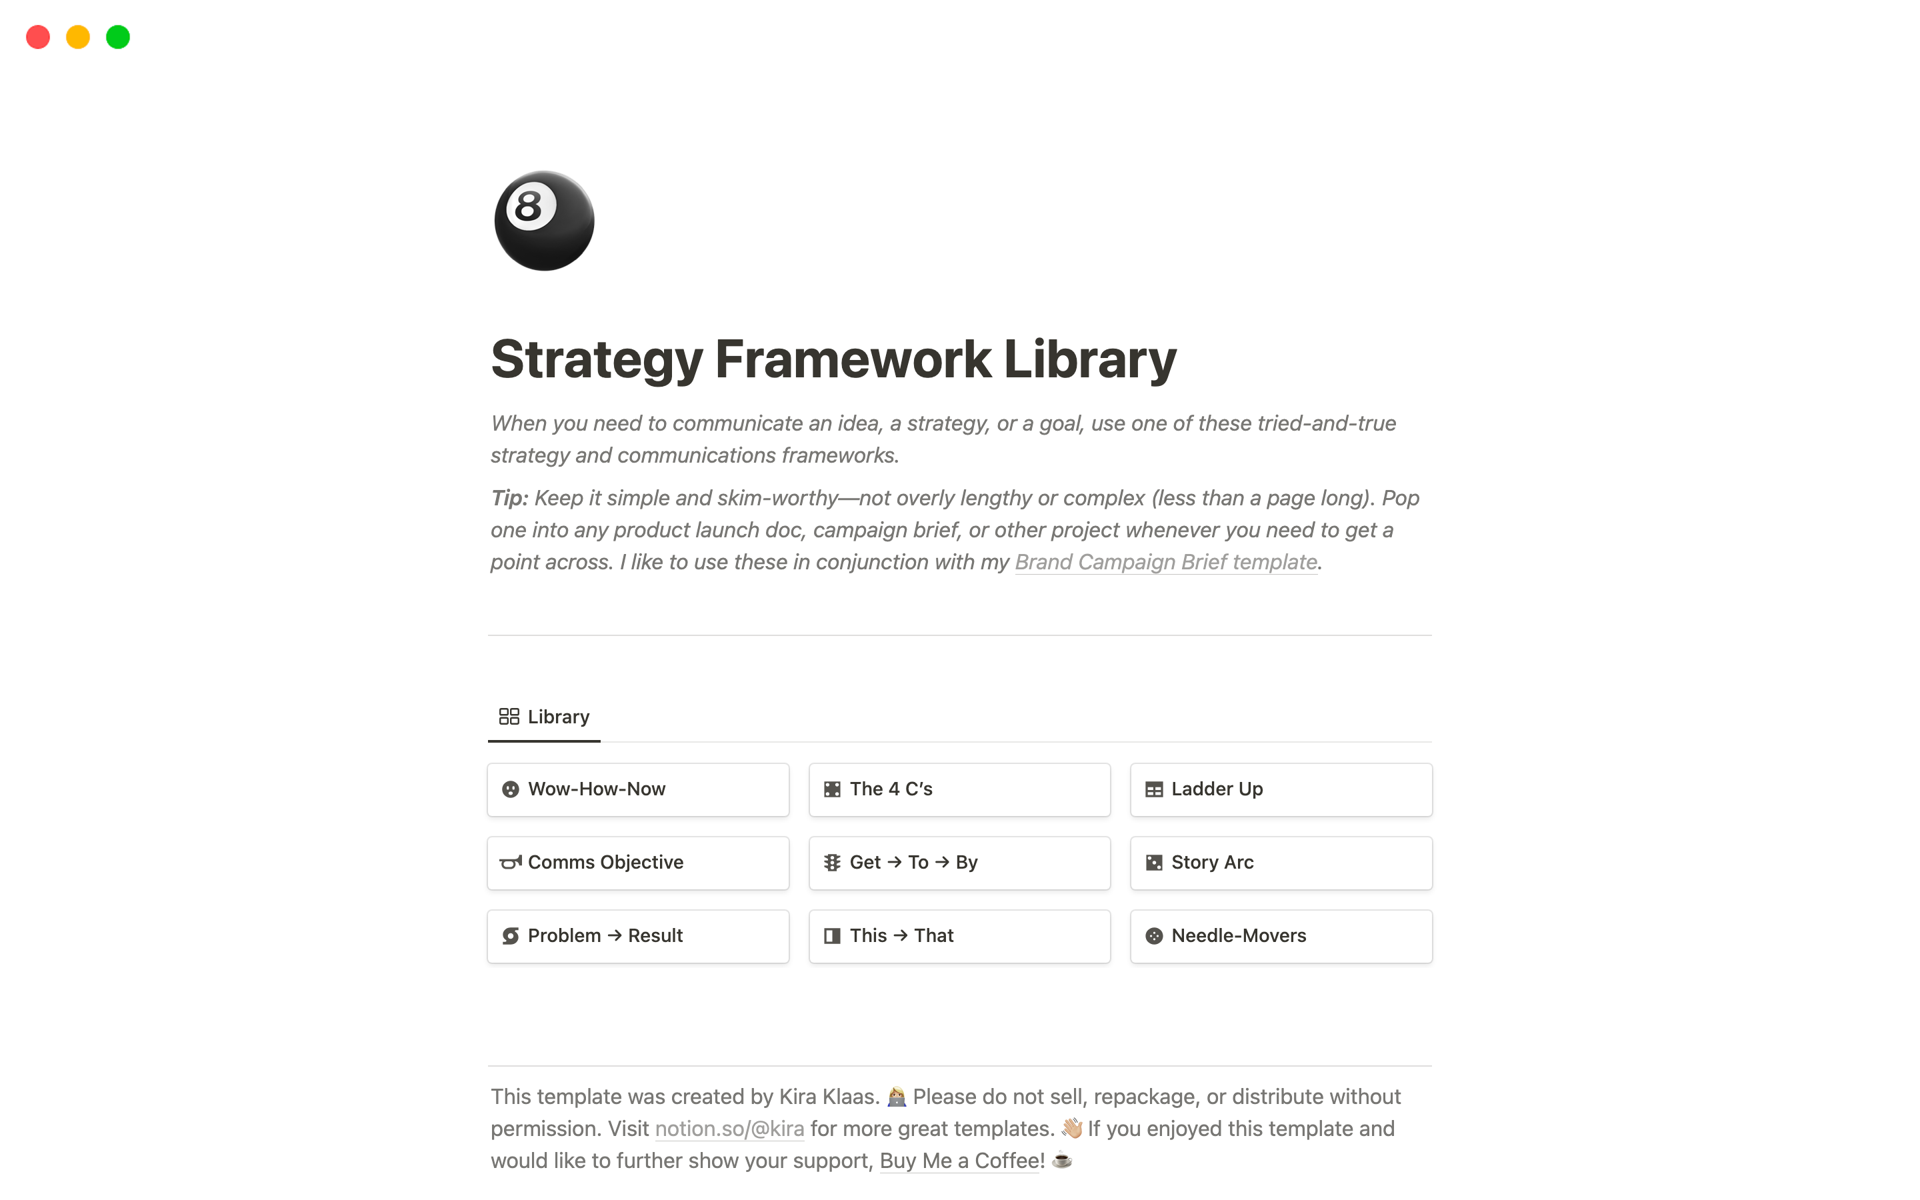 A library of the most useful pre-built strategic communications and messaging frameworks for marketers and brand strategists, with examples.